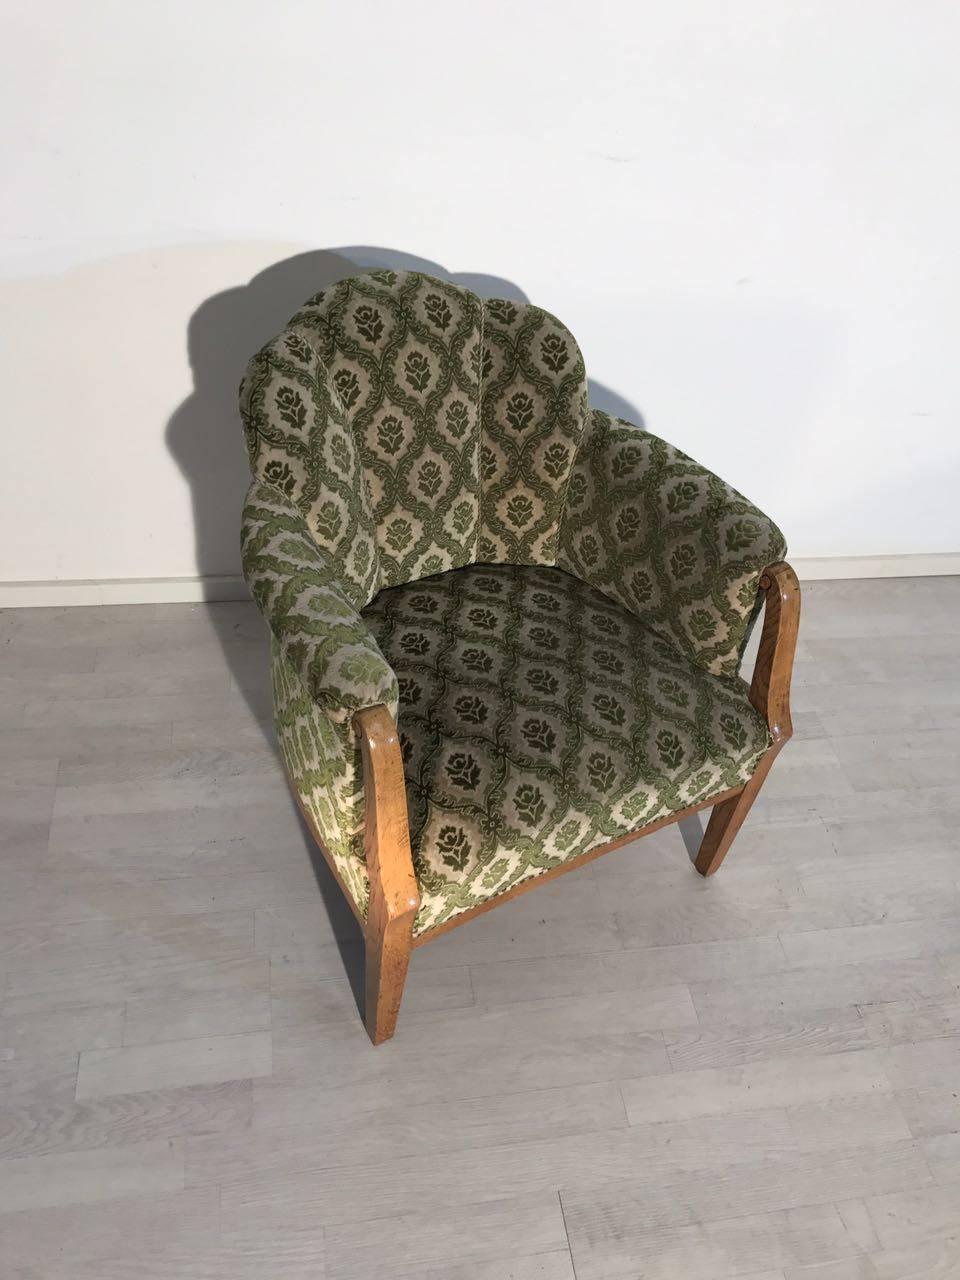 A vintage armchair from the Art Deco era. The armchair shines with a beautiful, striking fabric pattern. It convinces through a wonderful and comfortable body and is perfect for any purpose! A wonderful design which is typical for the Art Deco